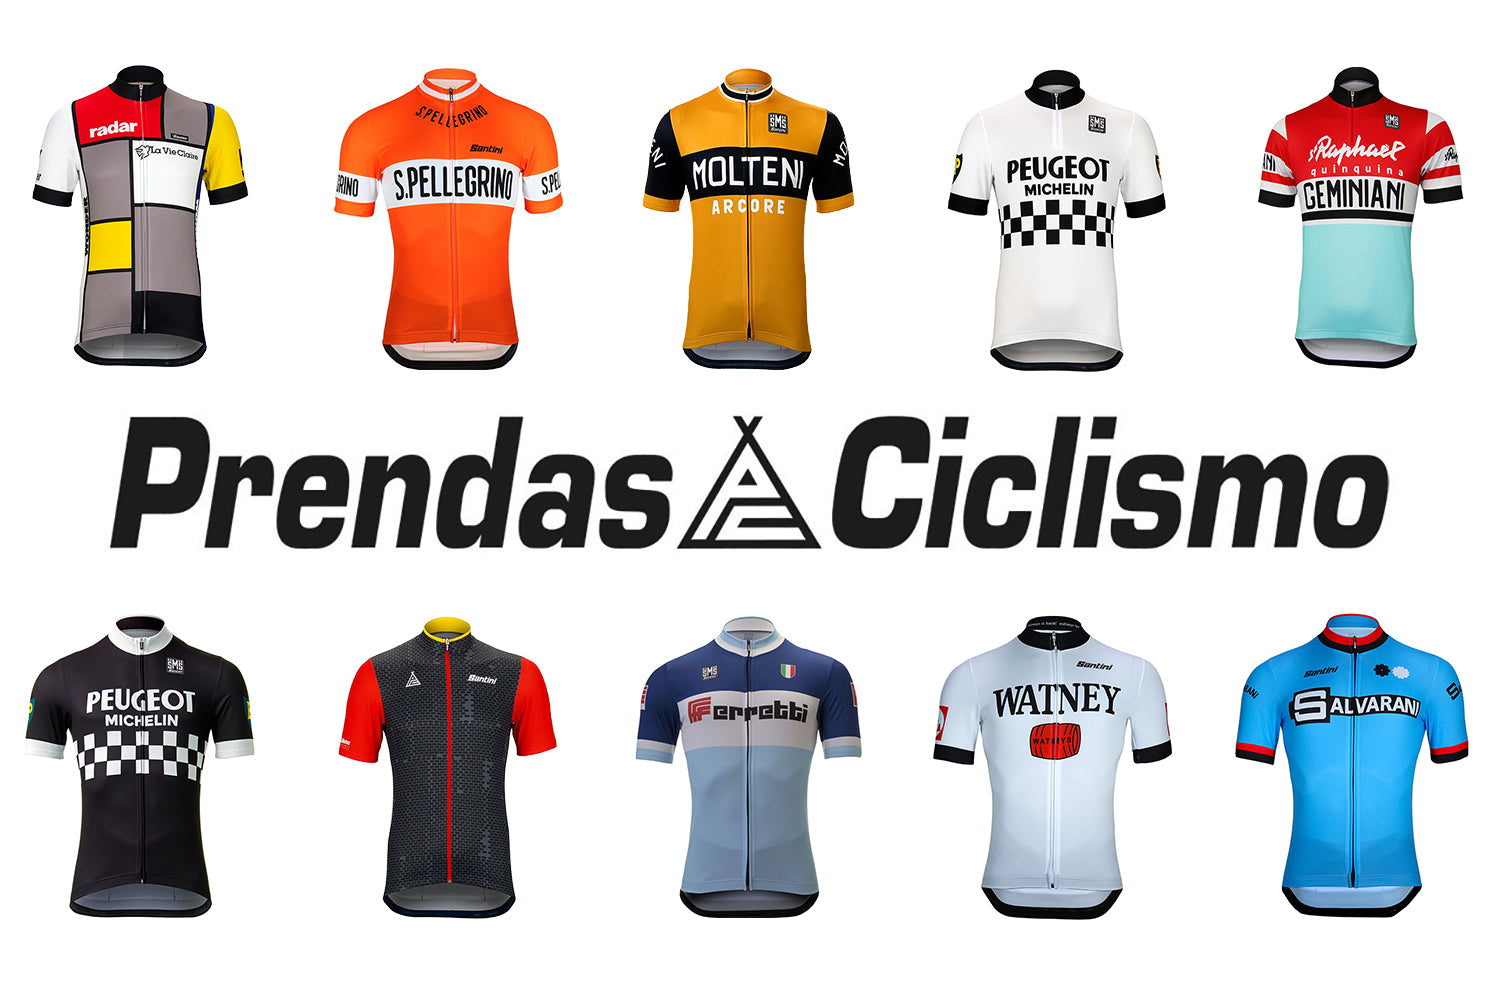 Our best-selling cycling jerseys of 2020